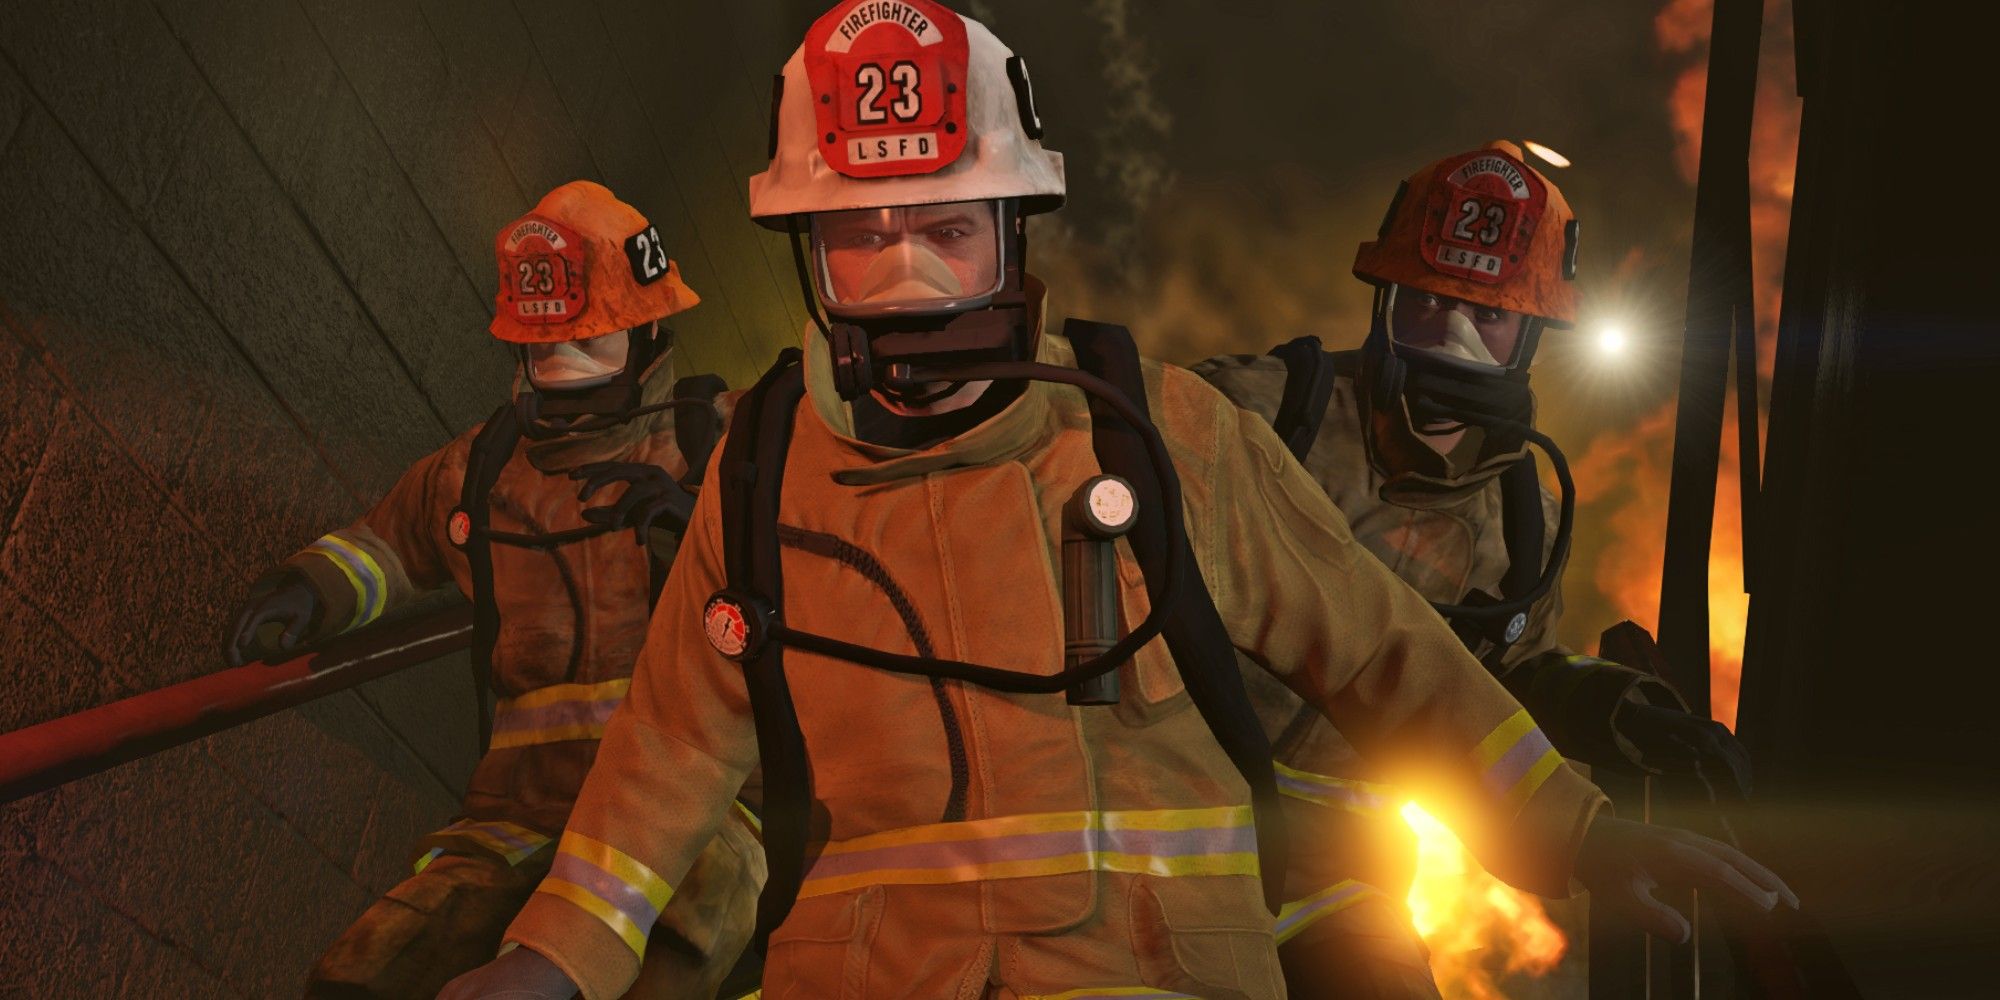 How GTA 6 Can Make Grand Theft Autos Firefighter Missions Fun Again